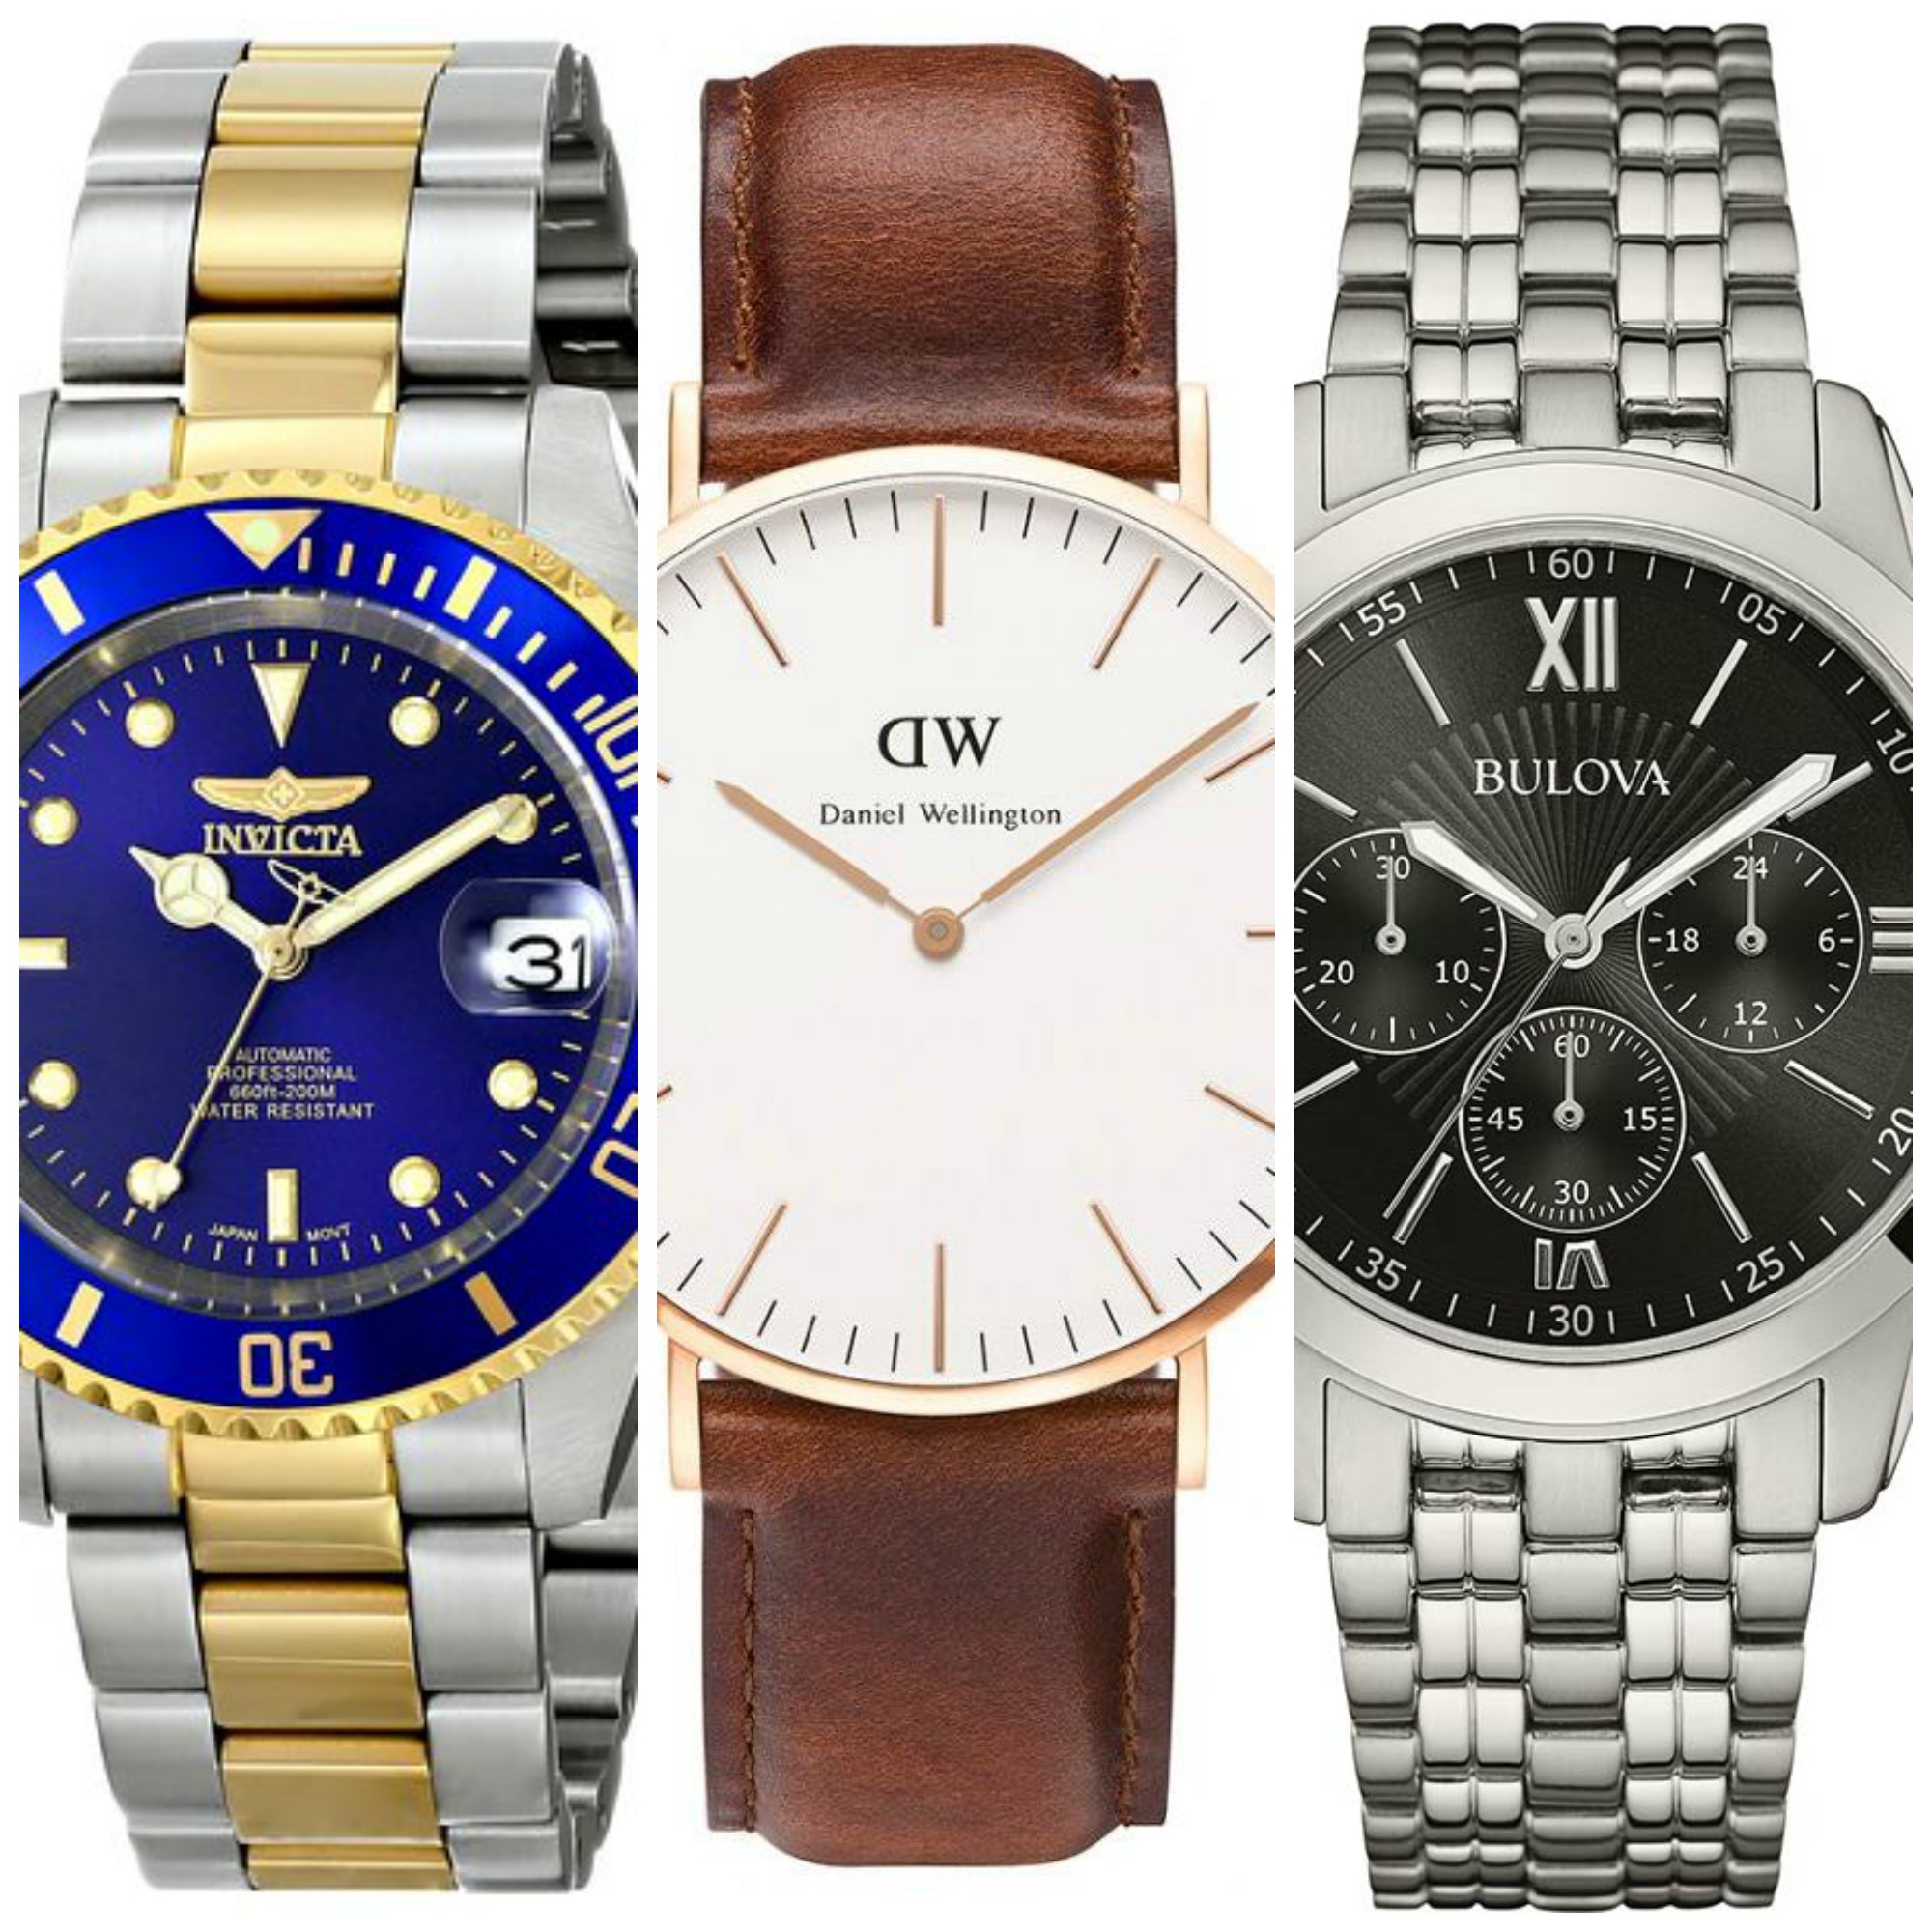 Top 10 Nice Cheap Watches For Men Under £100 | Best Affordable Watch